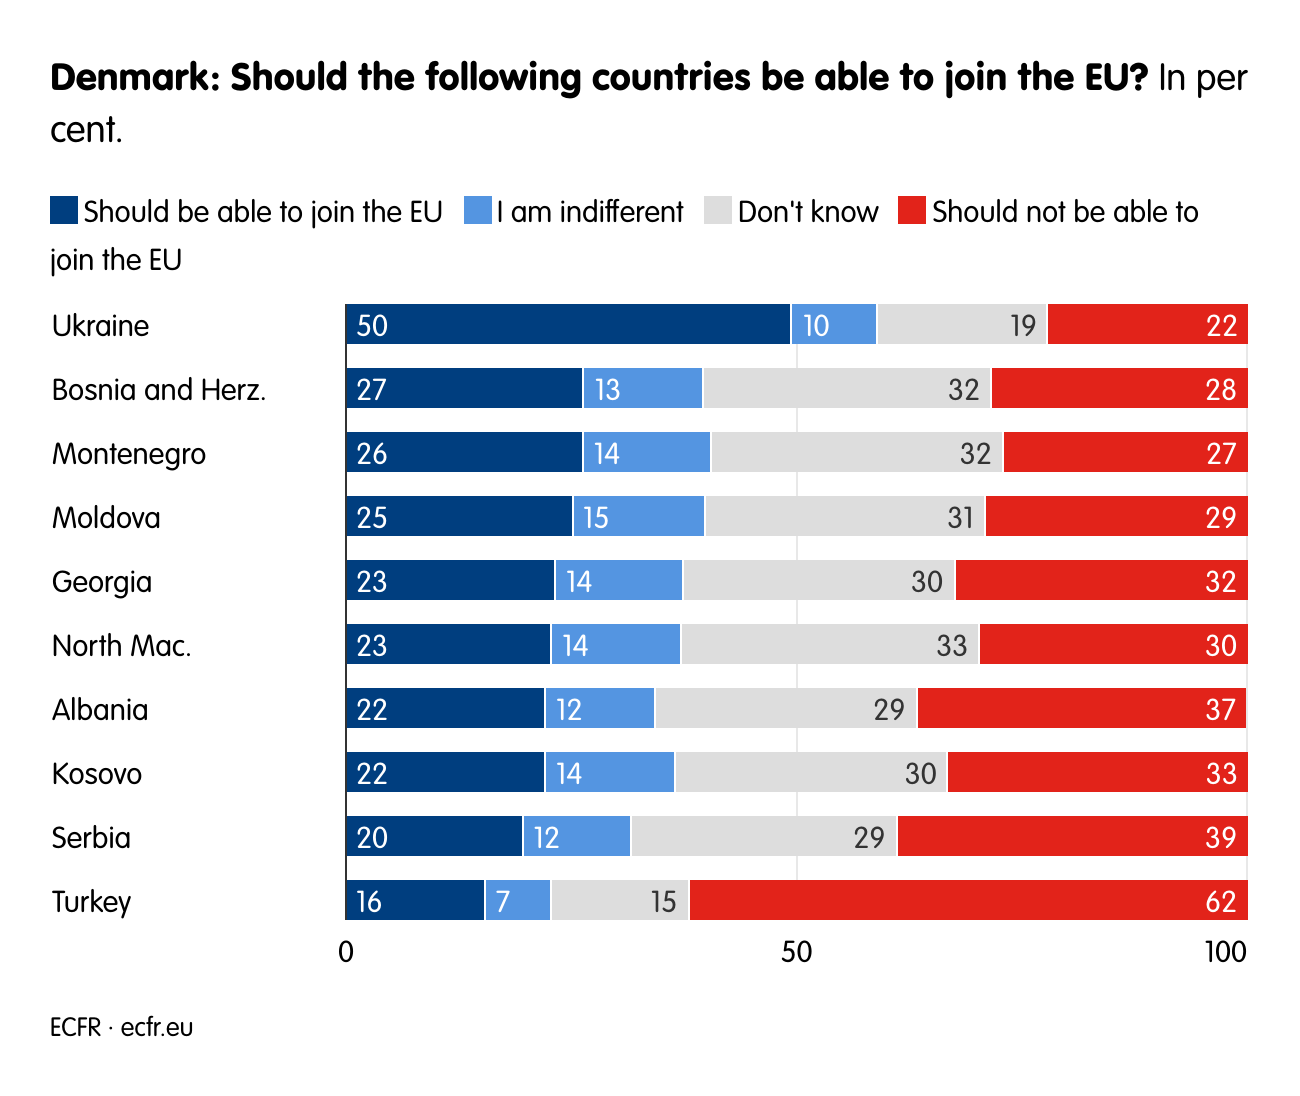 Denmark: Should the following countries be able to join the EU? 